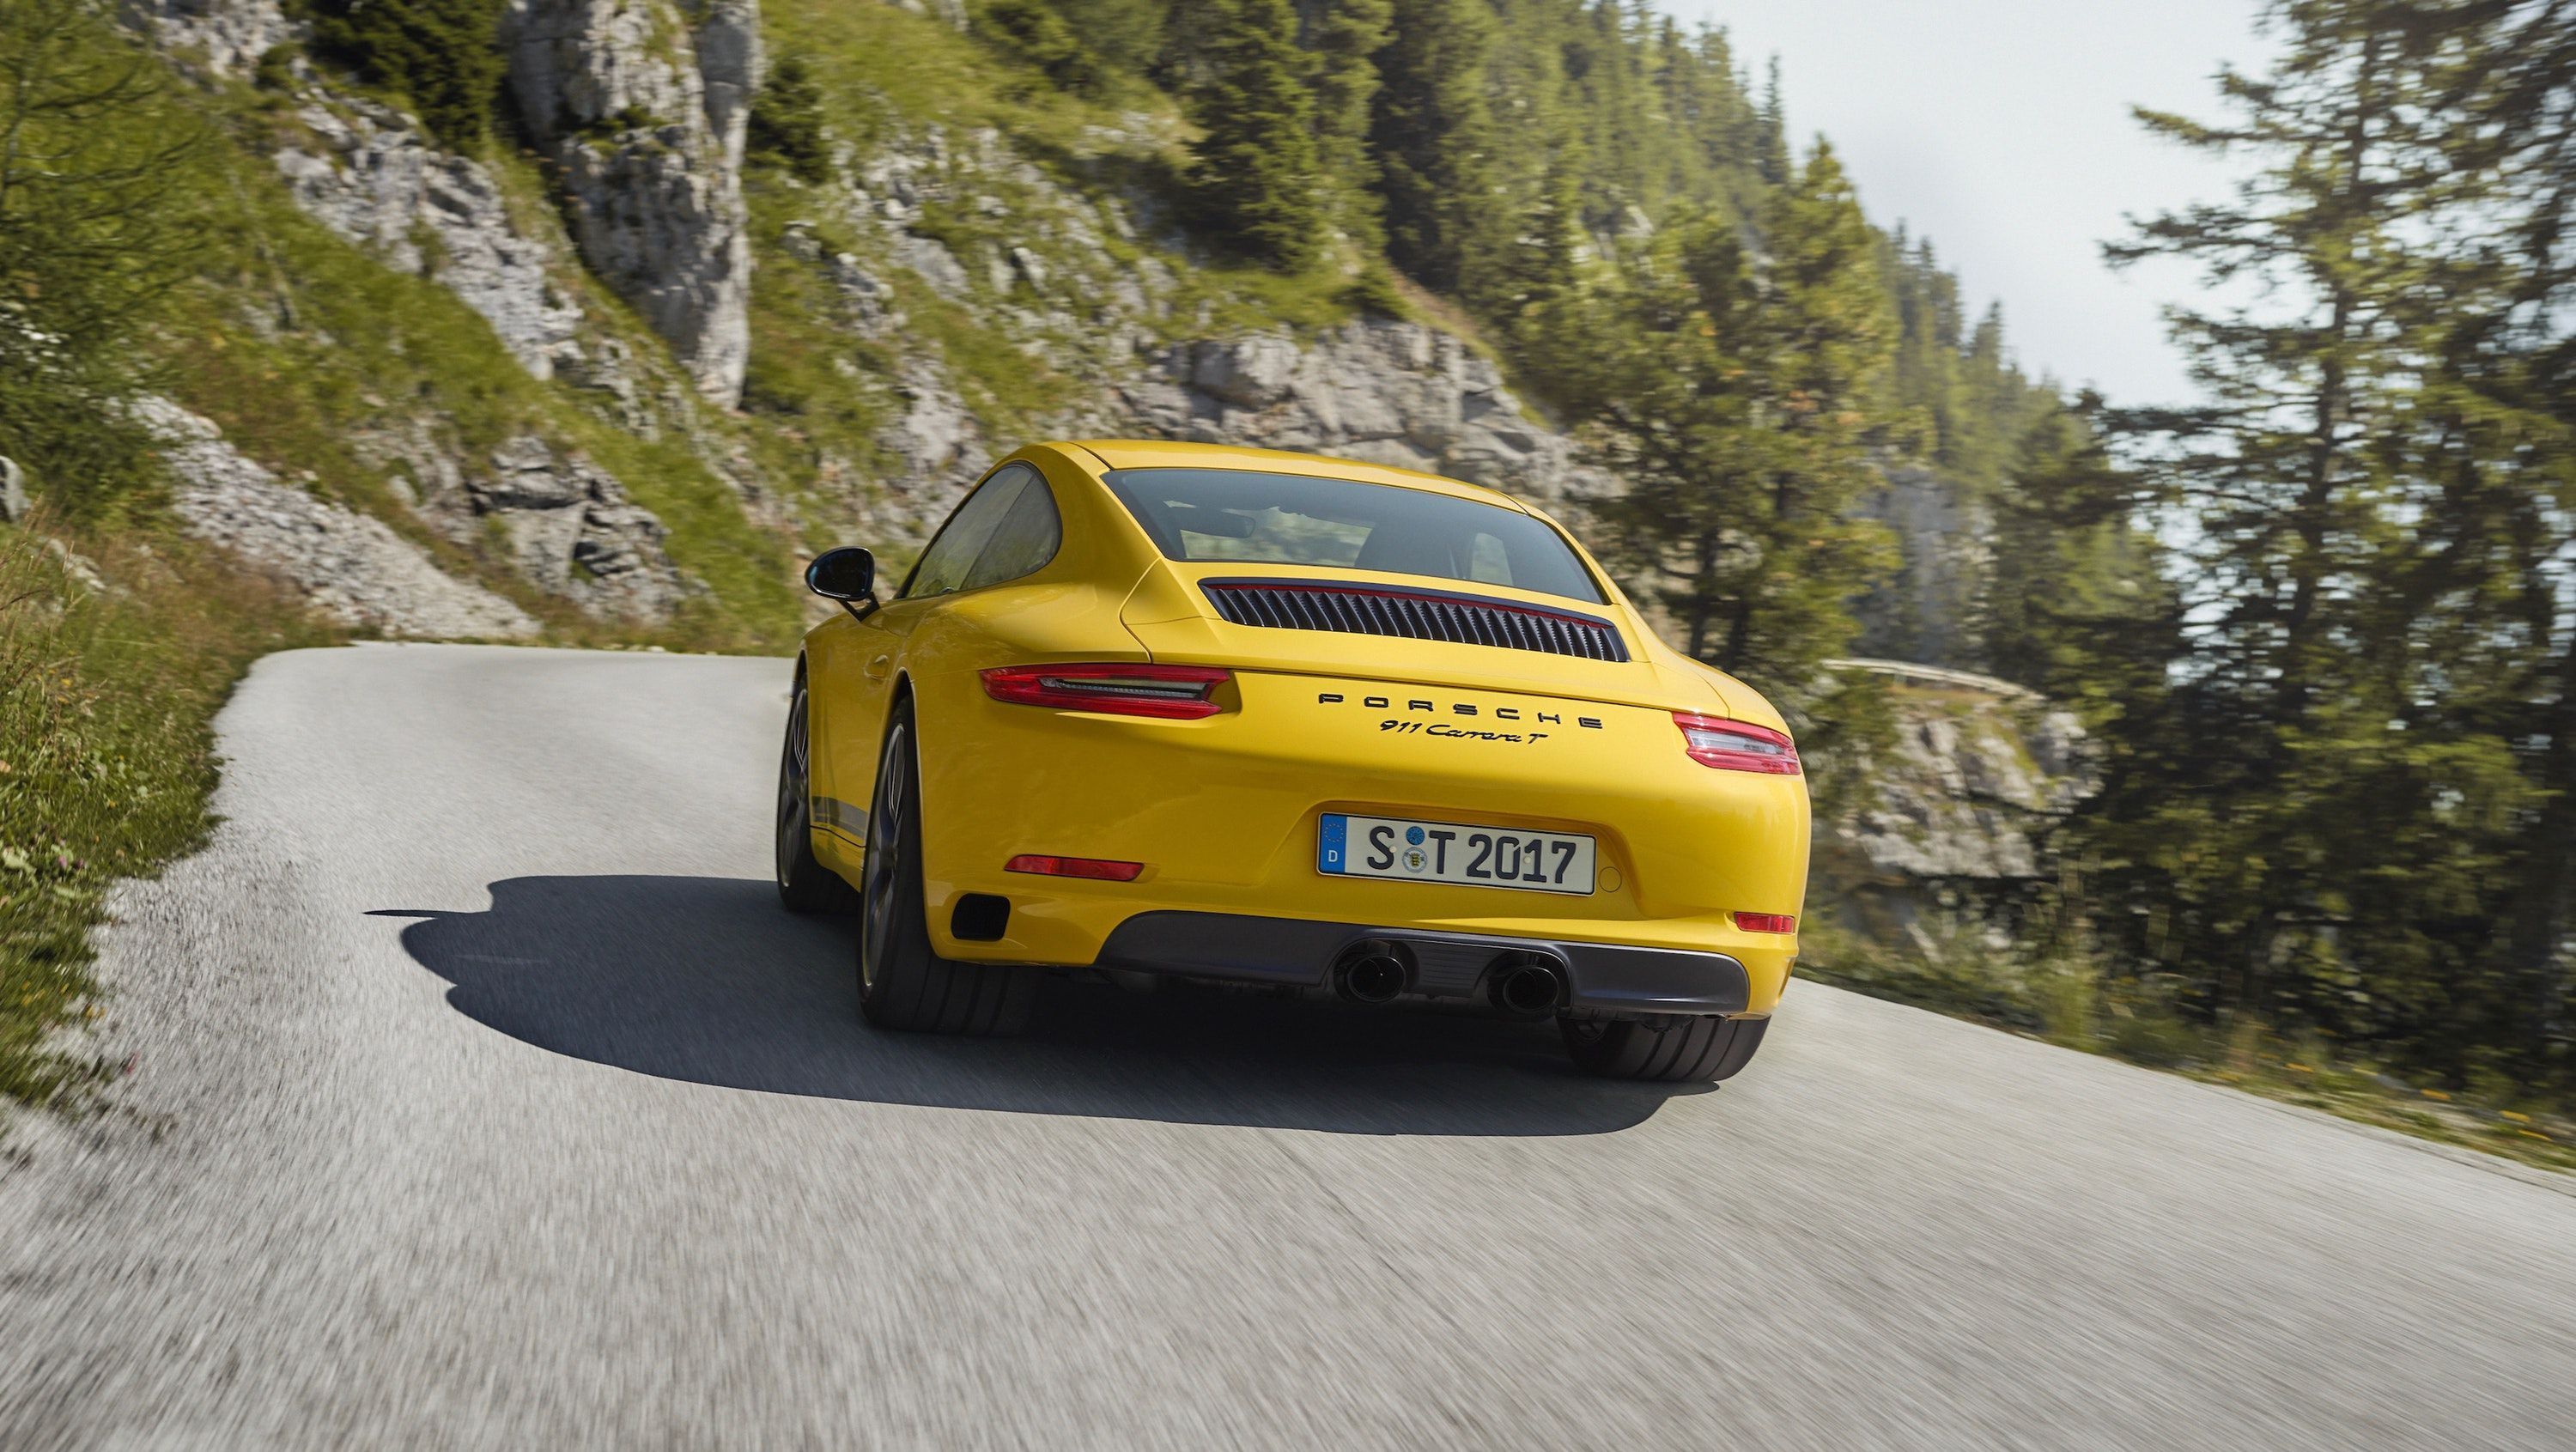 Yellow Porsche 991 rear view driving on a road up a mountain